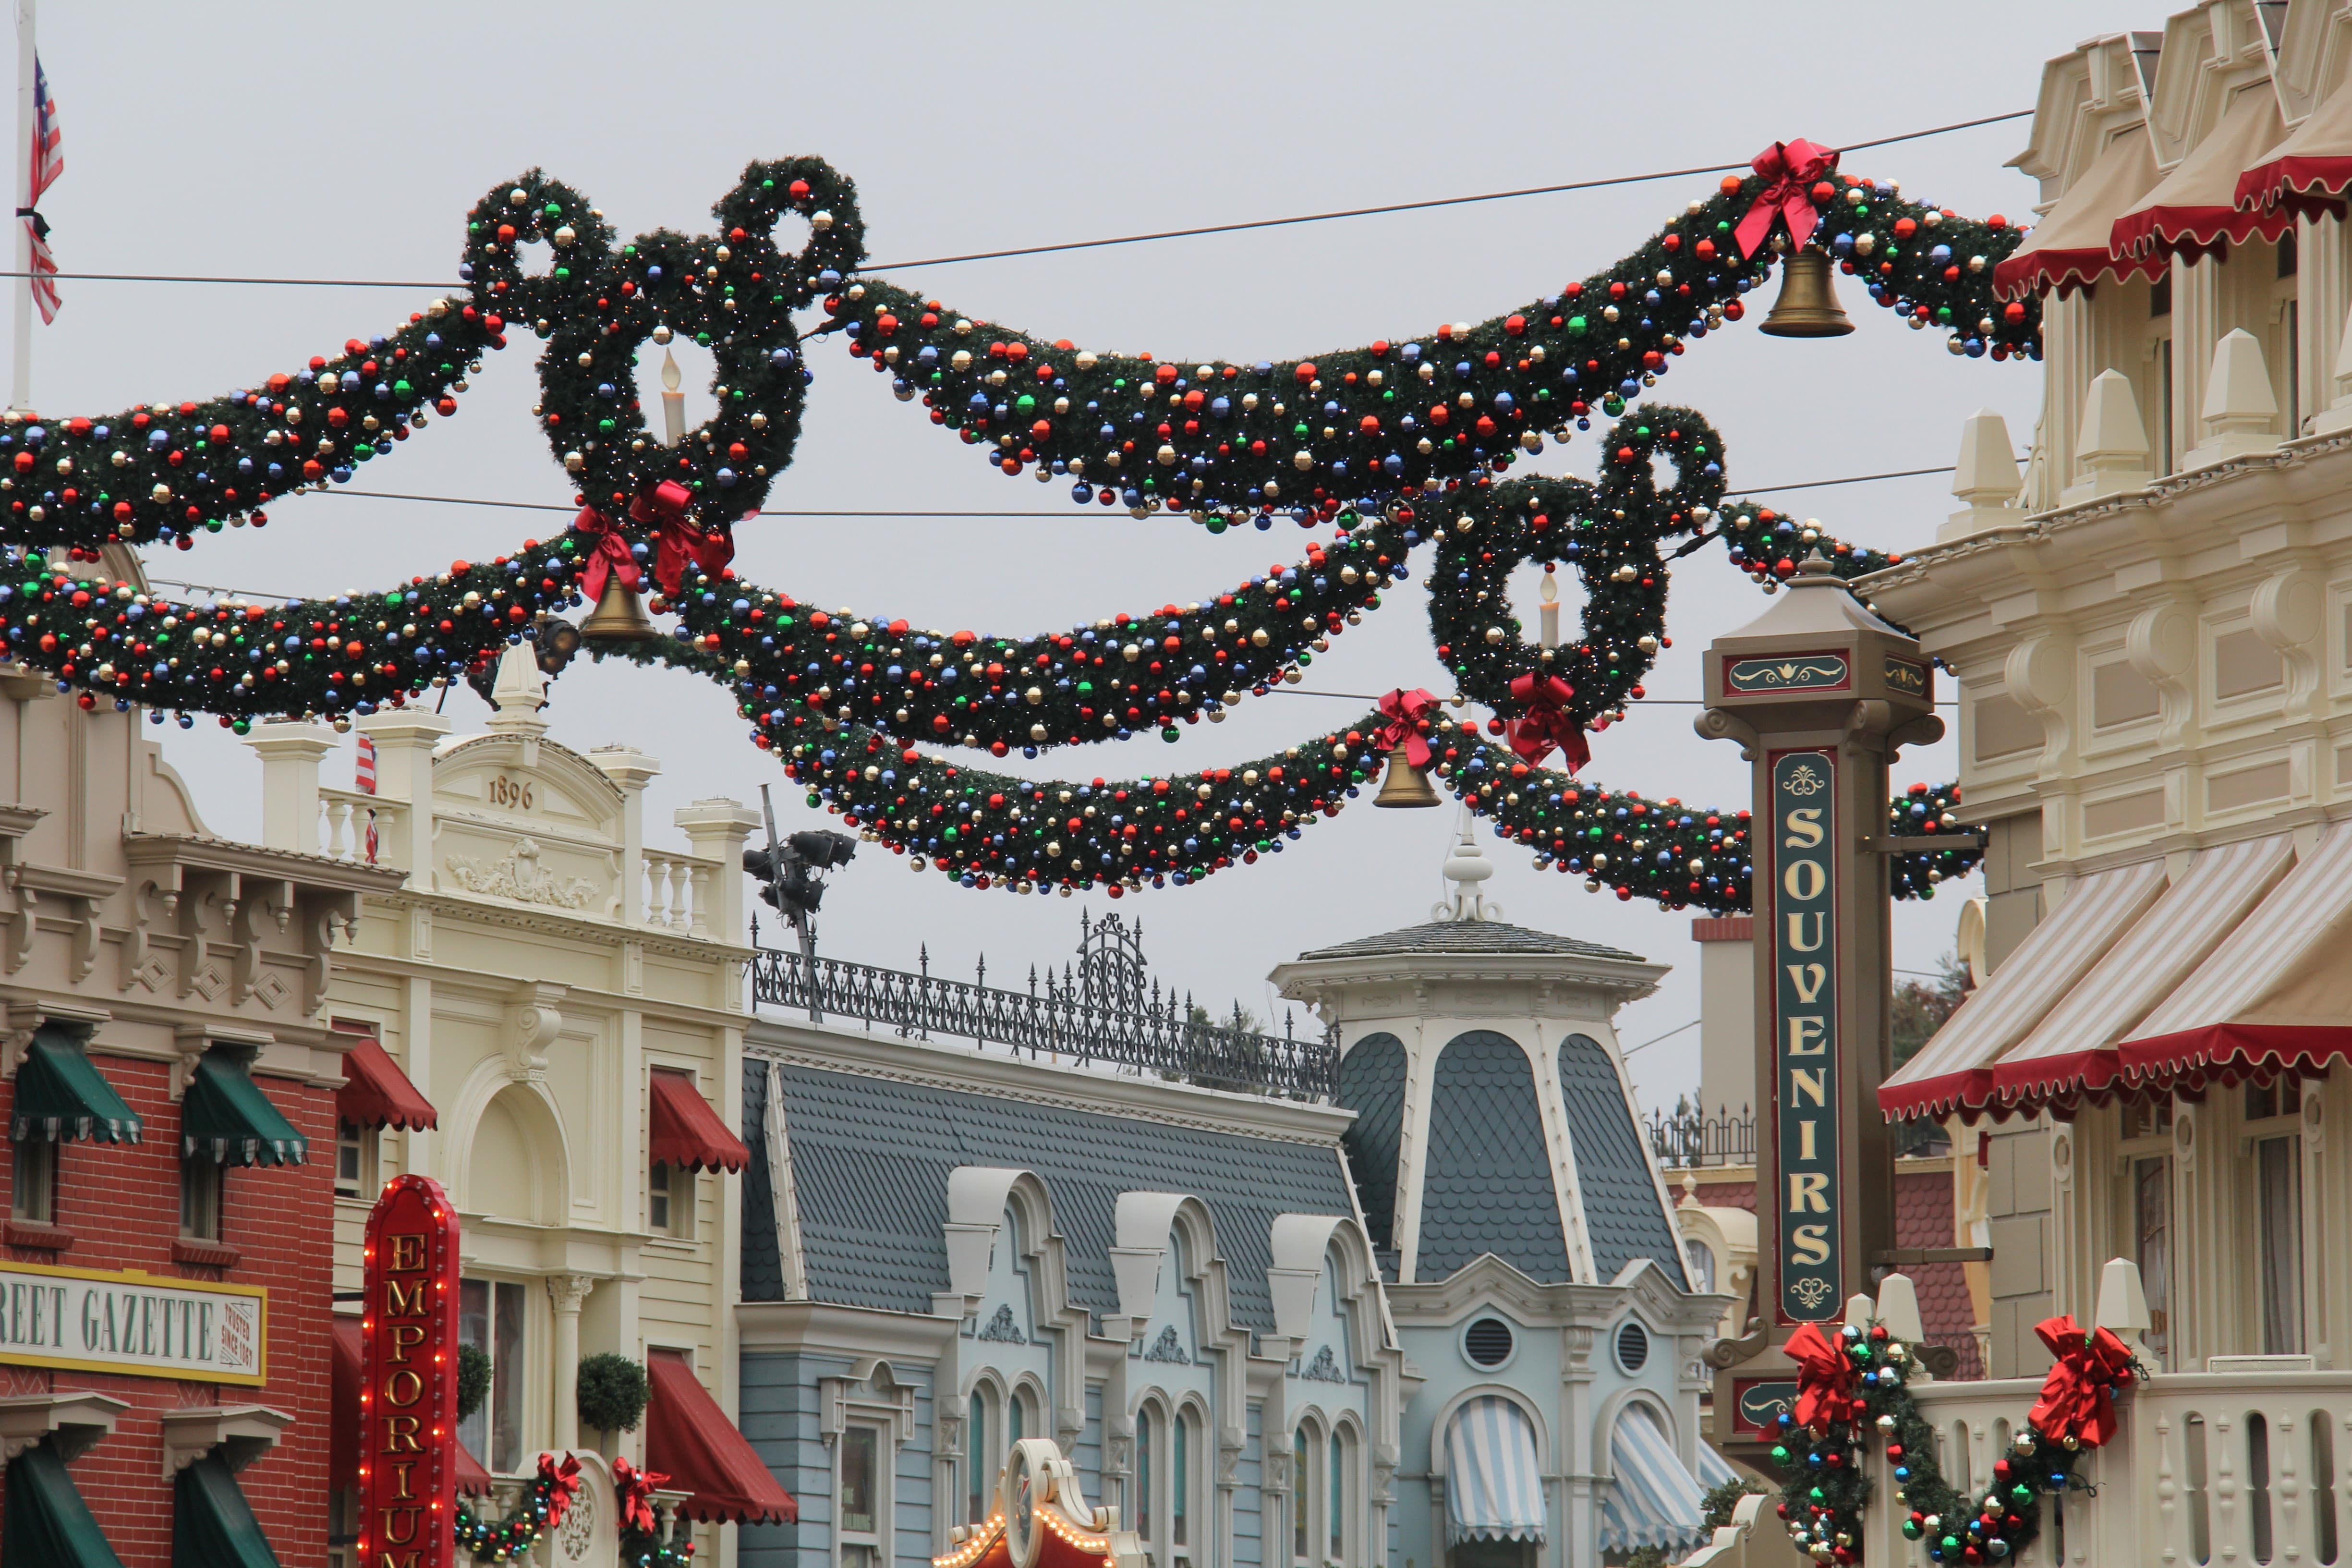 New When Does Disneyland Decorate For Christmas for Small Space